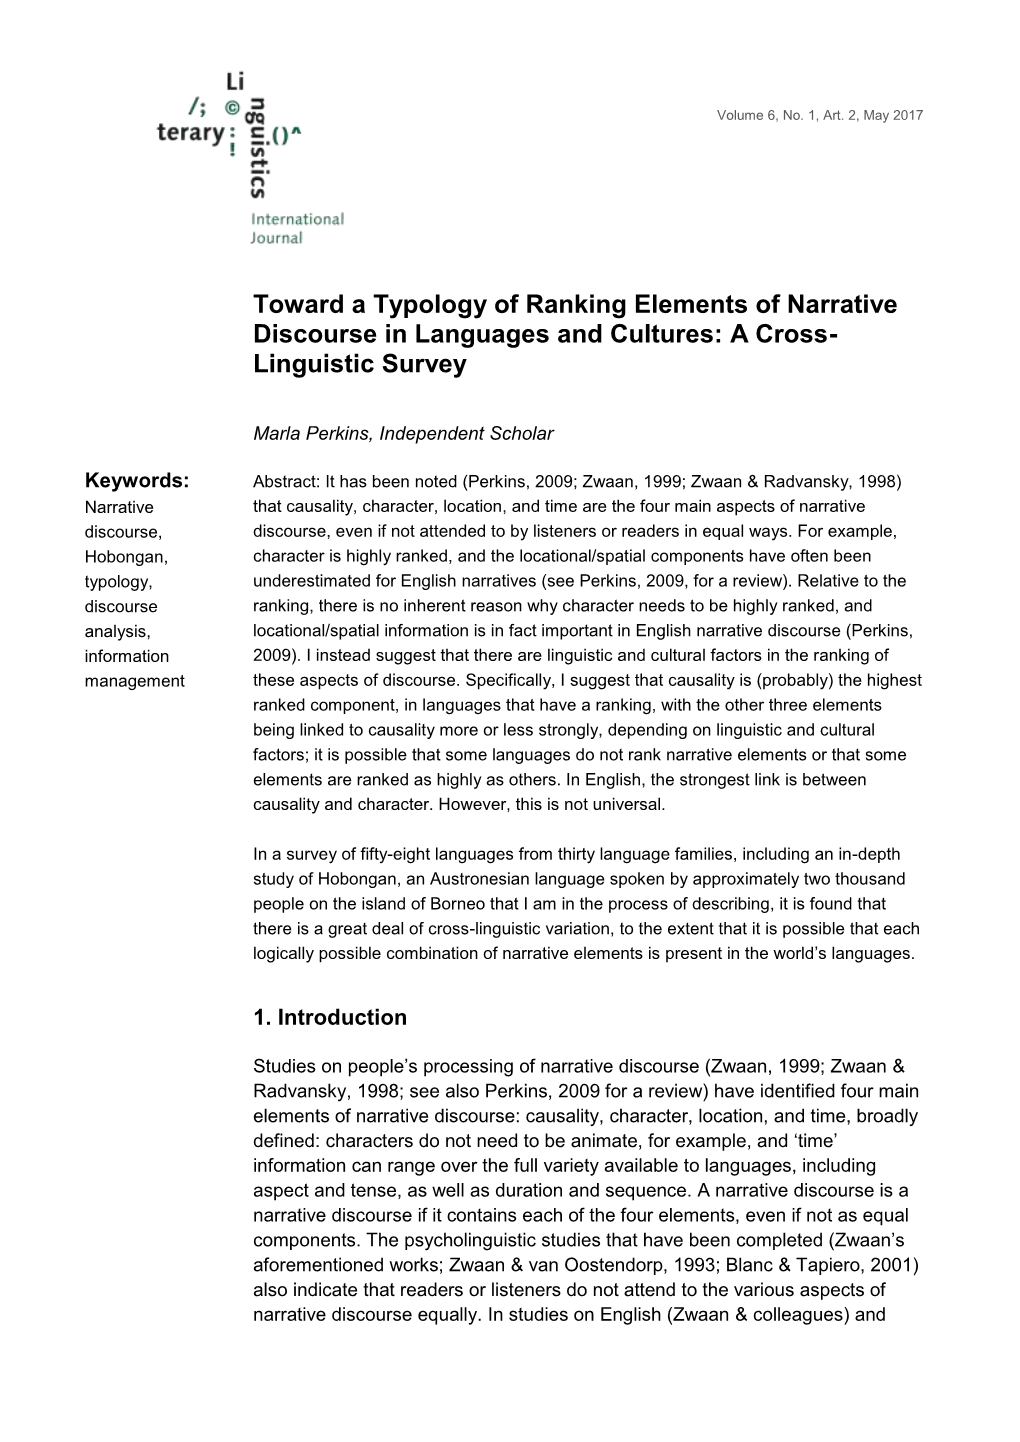 Toward a Typology of Ranking Elements of Narrative Discourse in Languages and Cultures: a Cross- Linguistic Survey